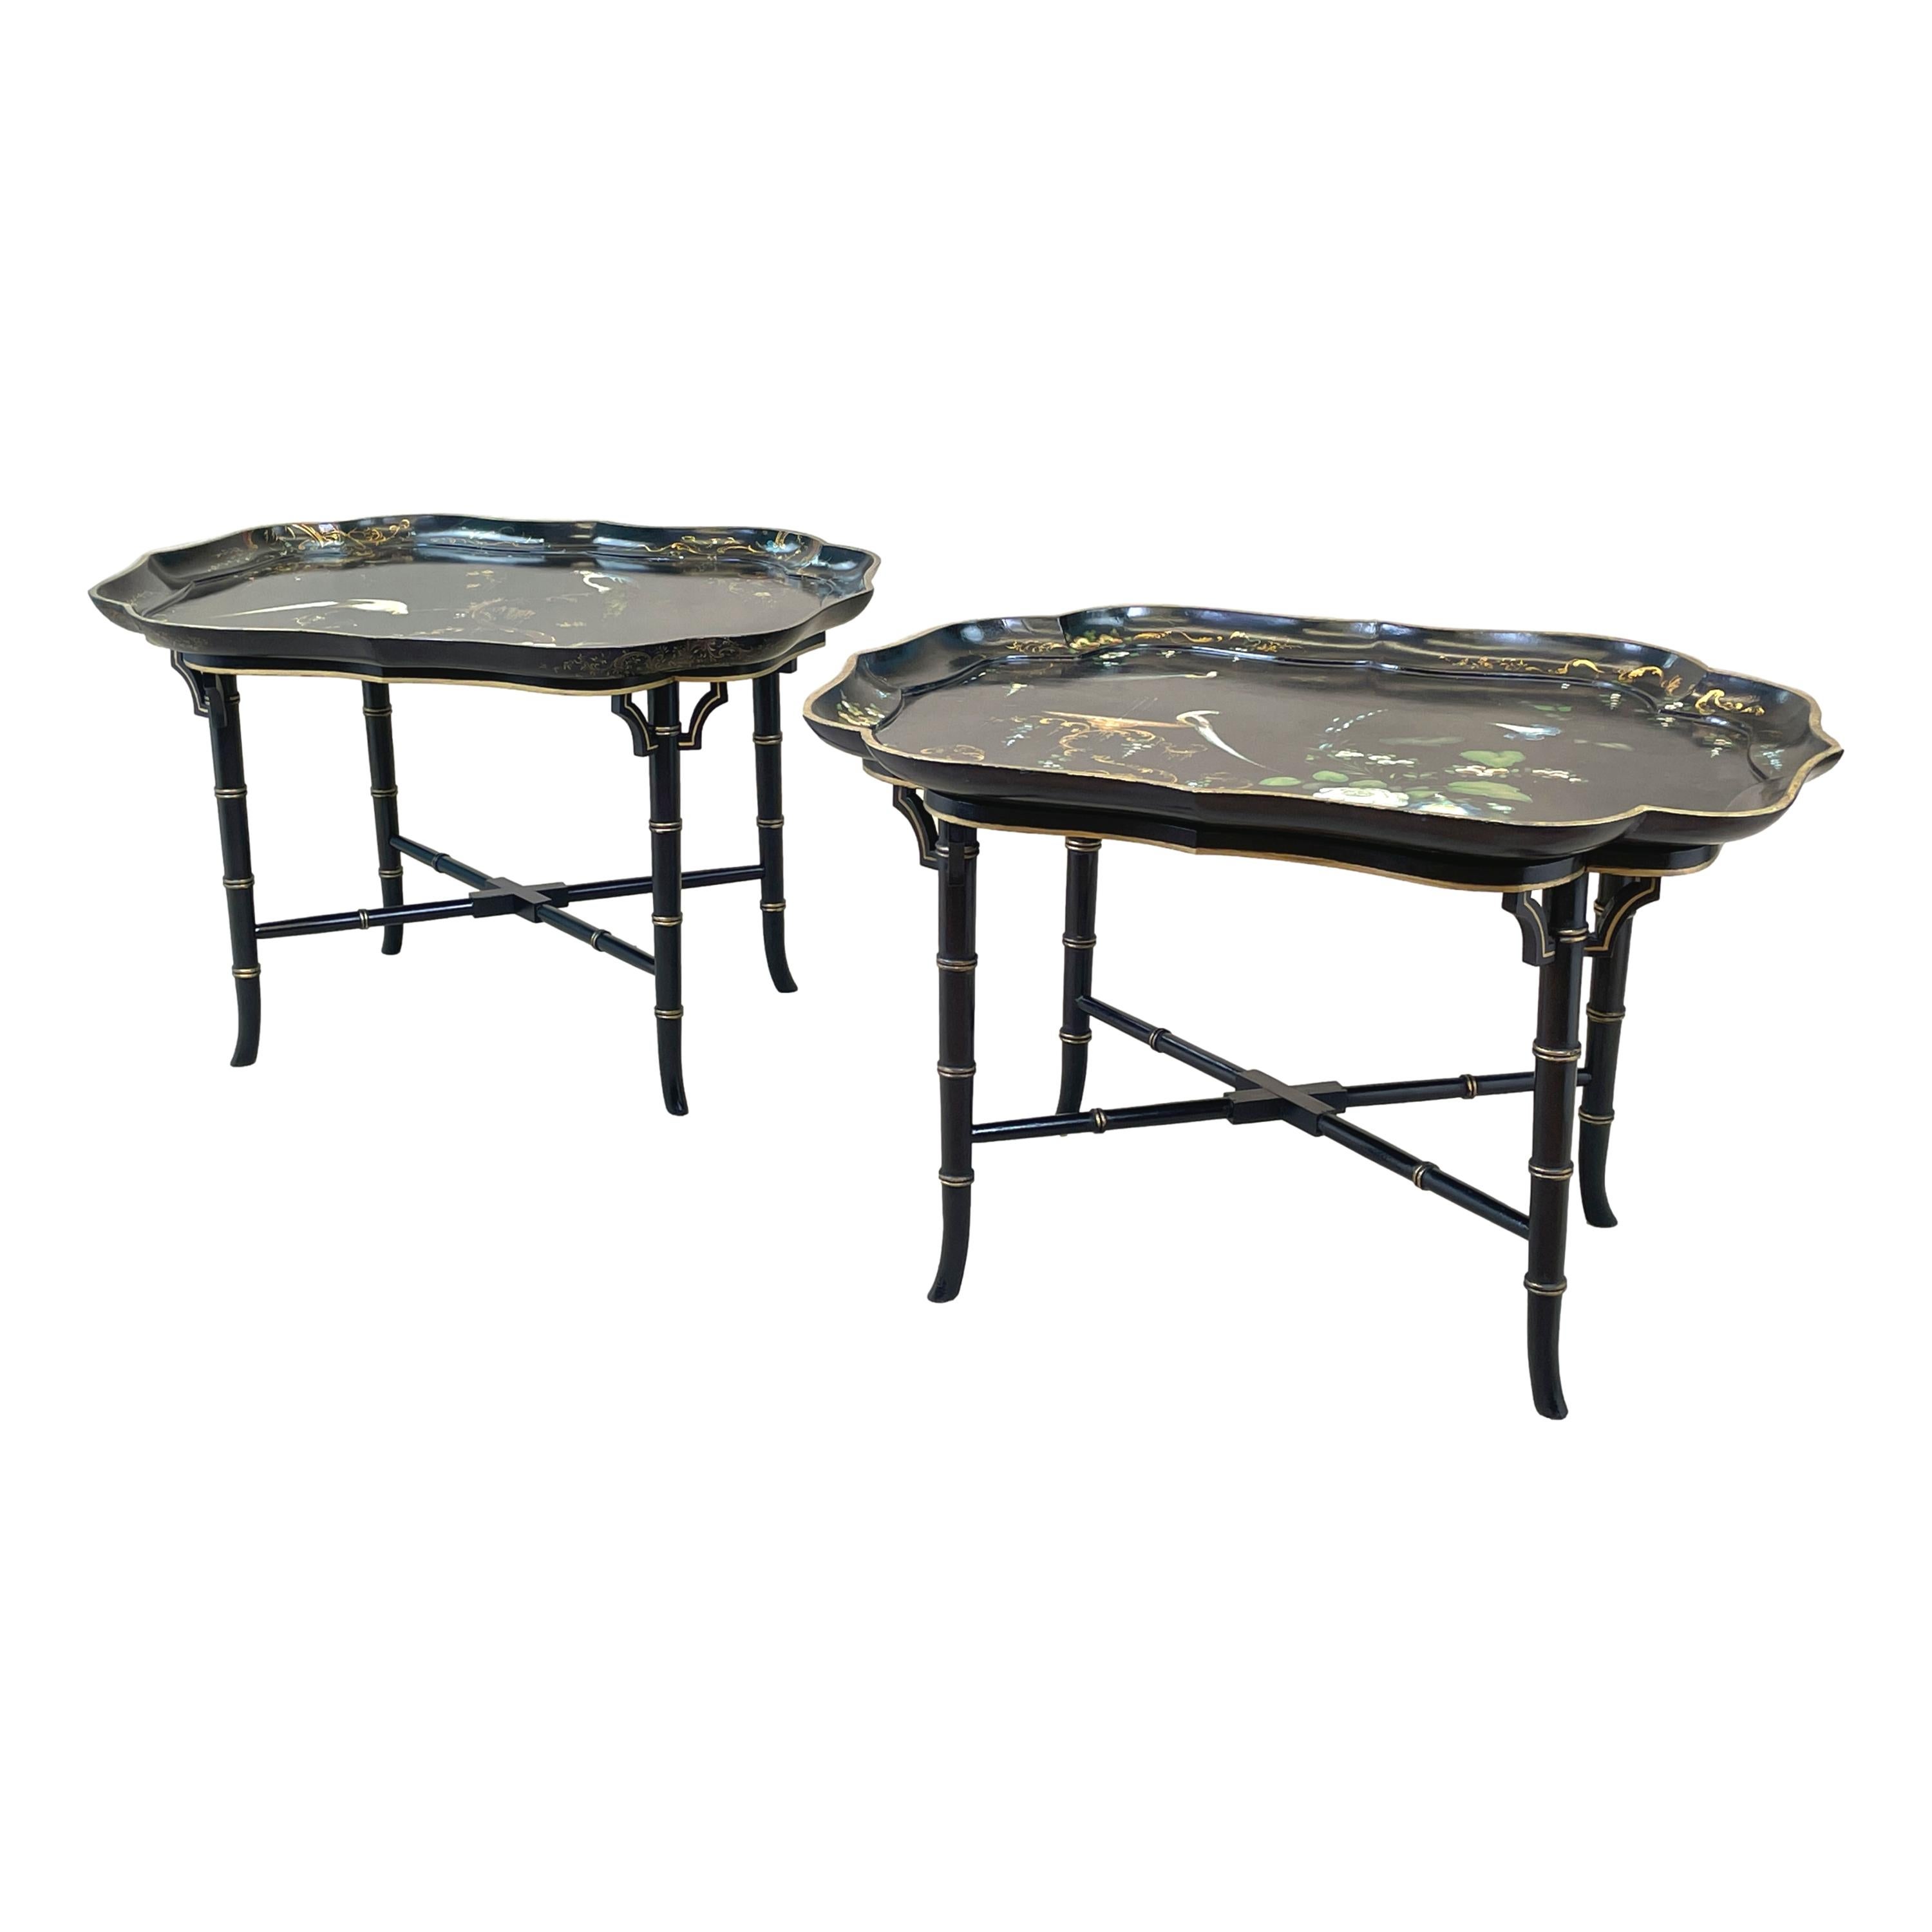 Pair of Papier Mache Tray on Stand Coffee Tables 1